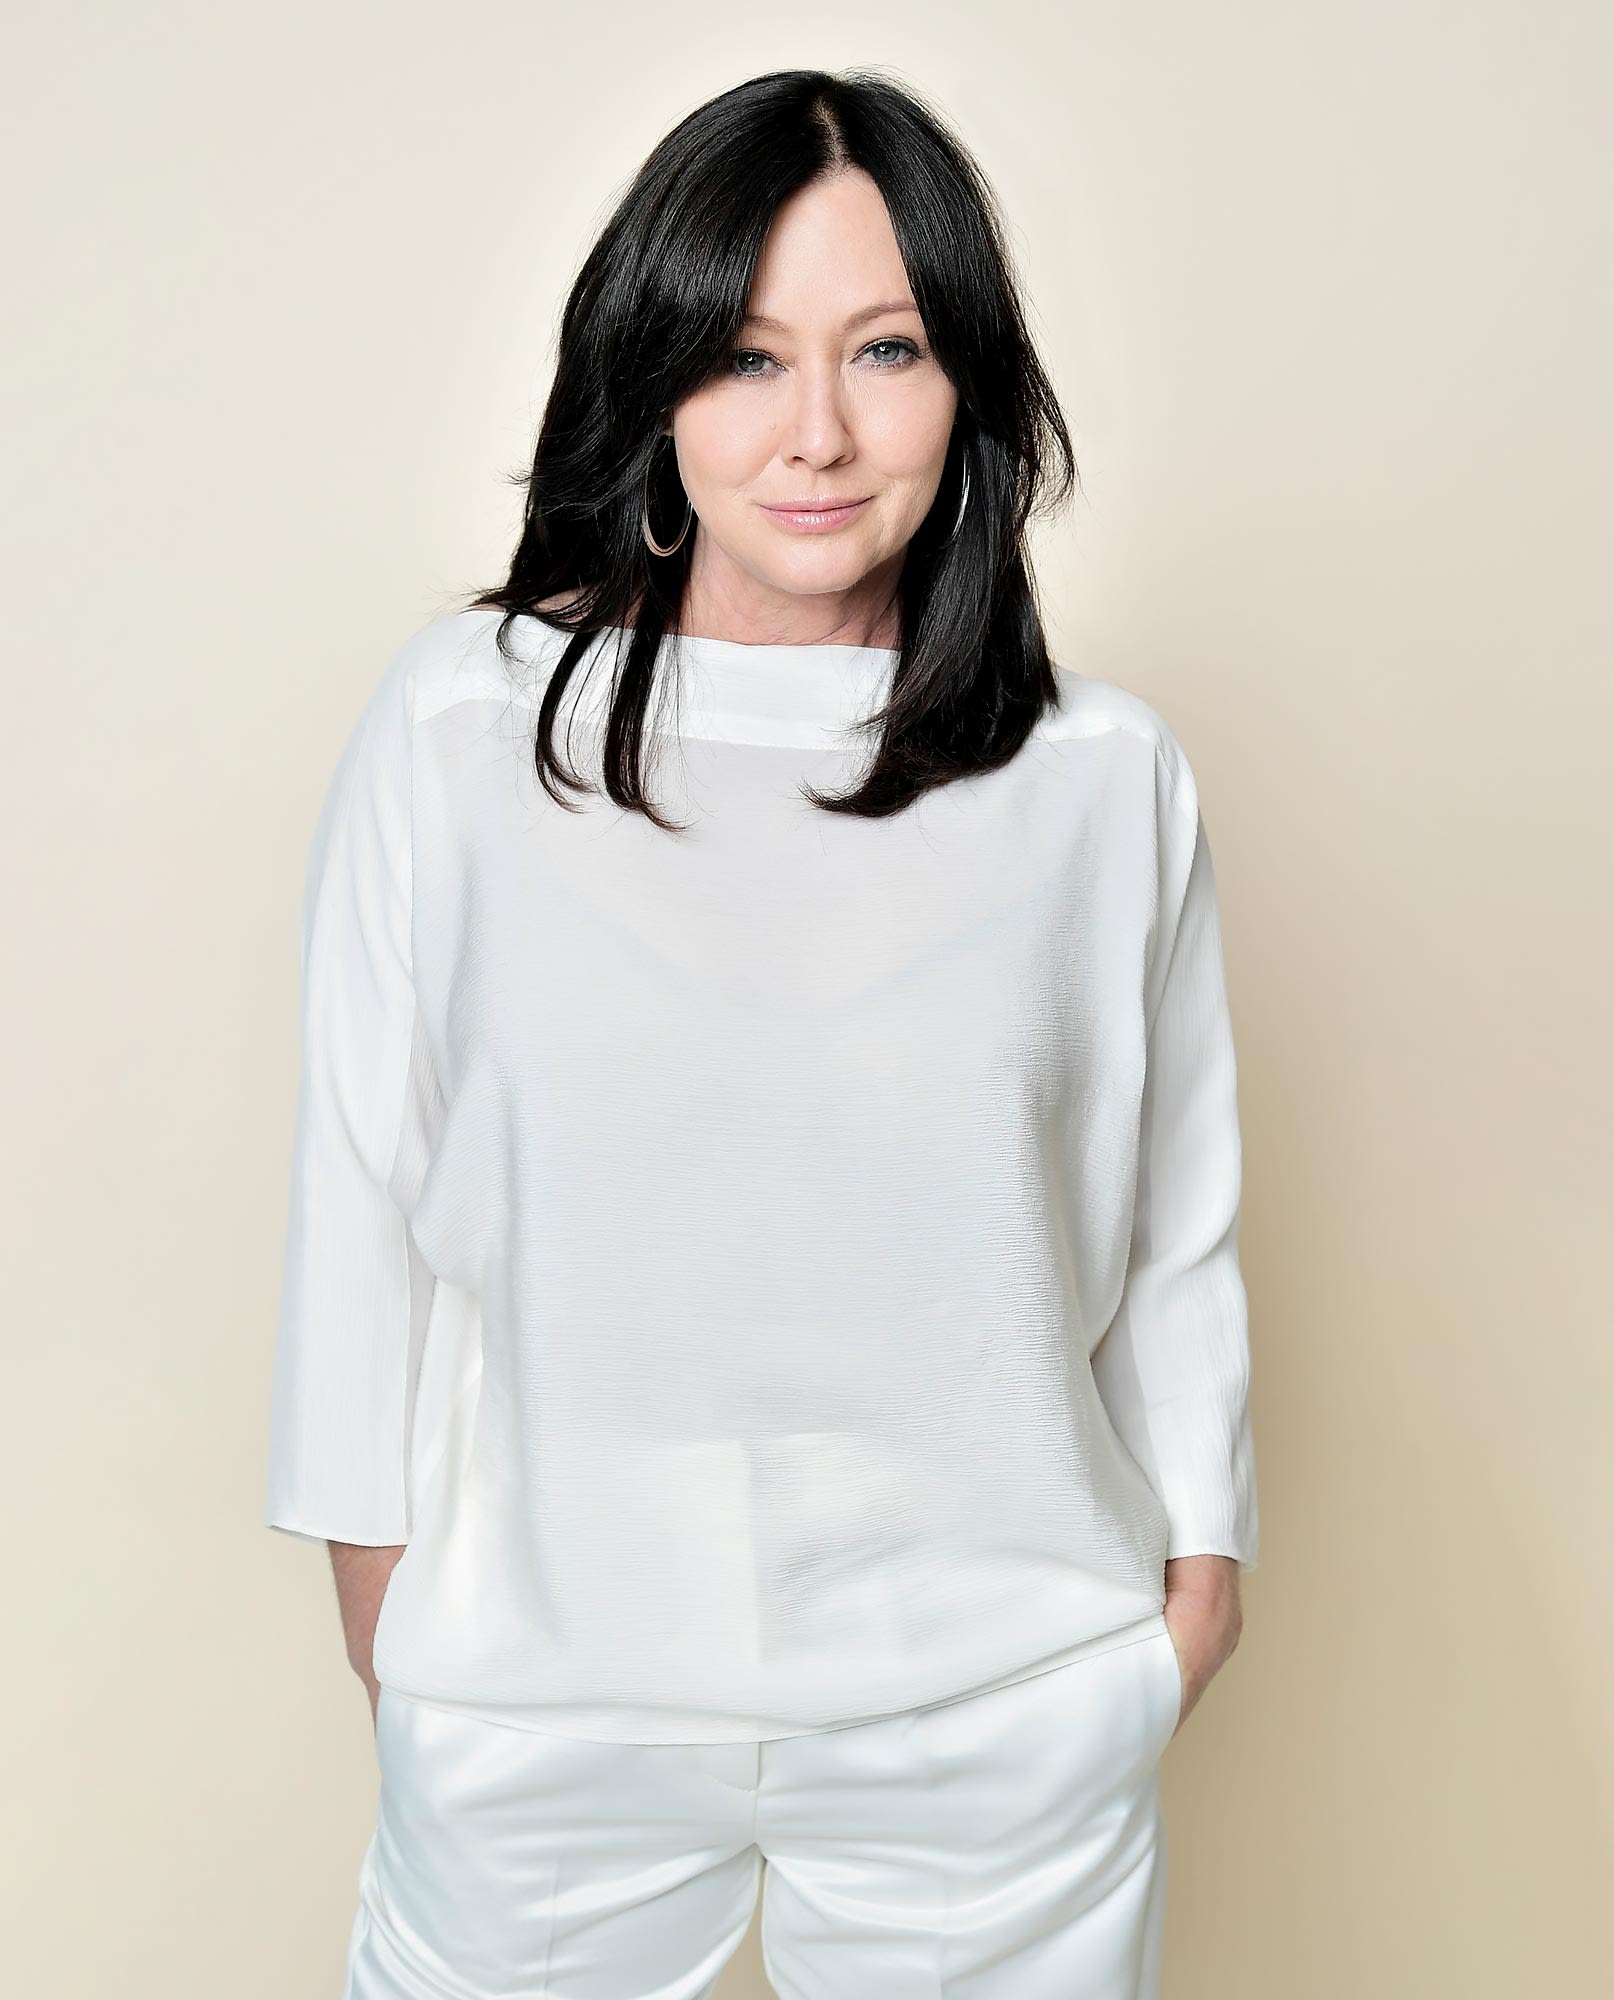 Shannen Doherty Explains What Fans Have to Do to Get a 'Charmed' Reunion